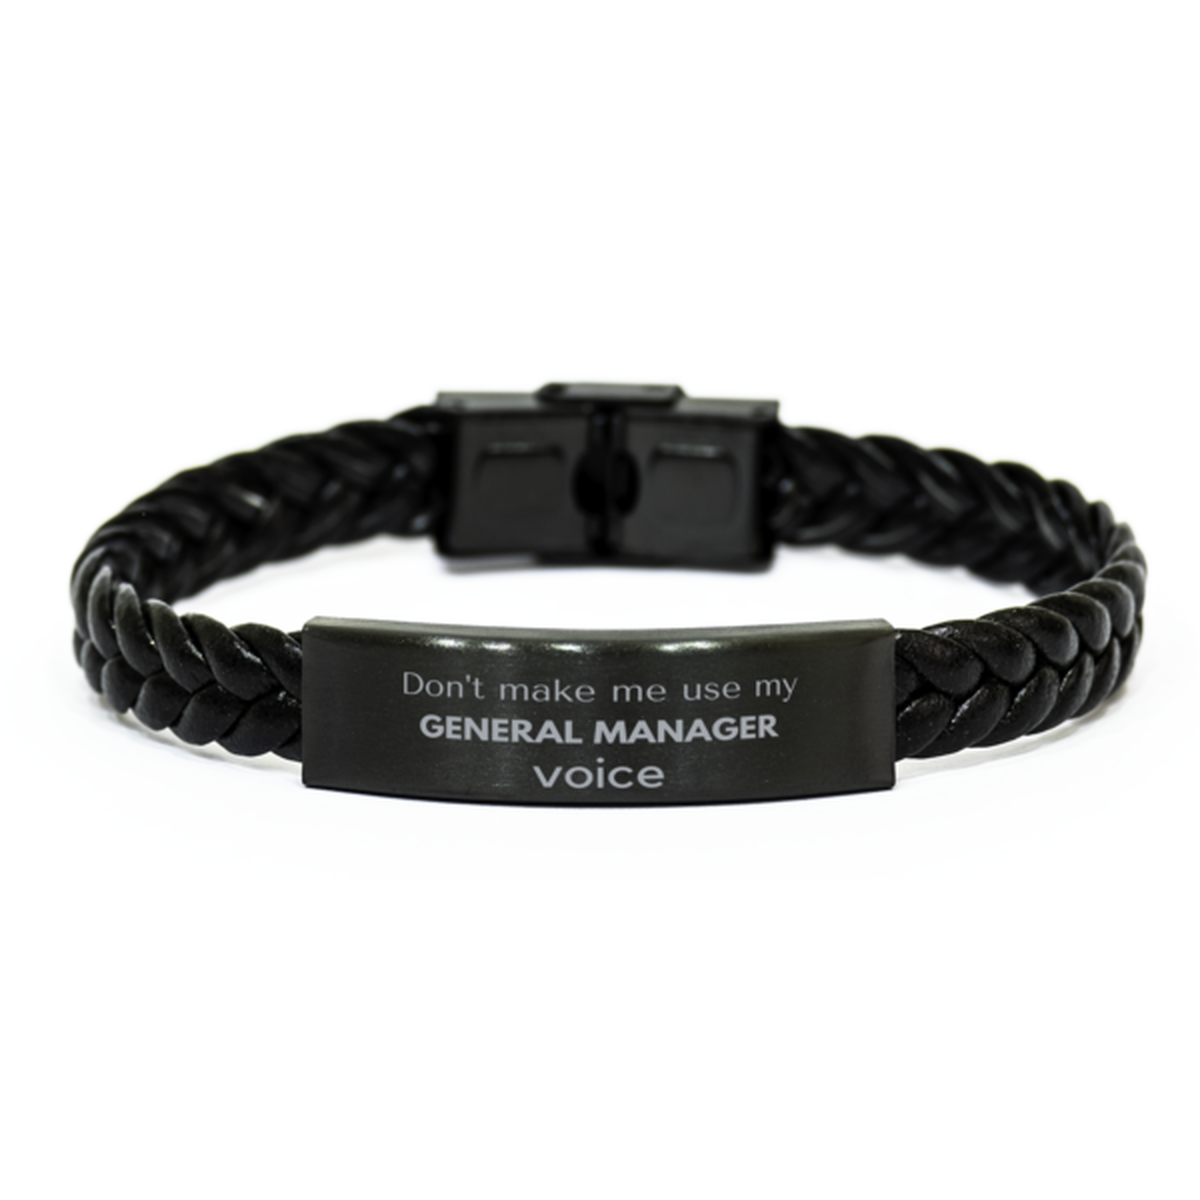 Don't make me use my General Manager voice, Sarcasm General Manager Gifts, Christmas General Manager Braided Leather Bracelet Birthday Unique Gifts For General Manager Coworkers, Men, Women, Colleague, Friends